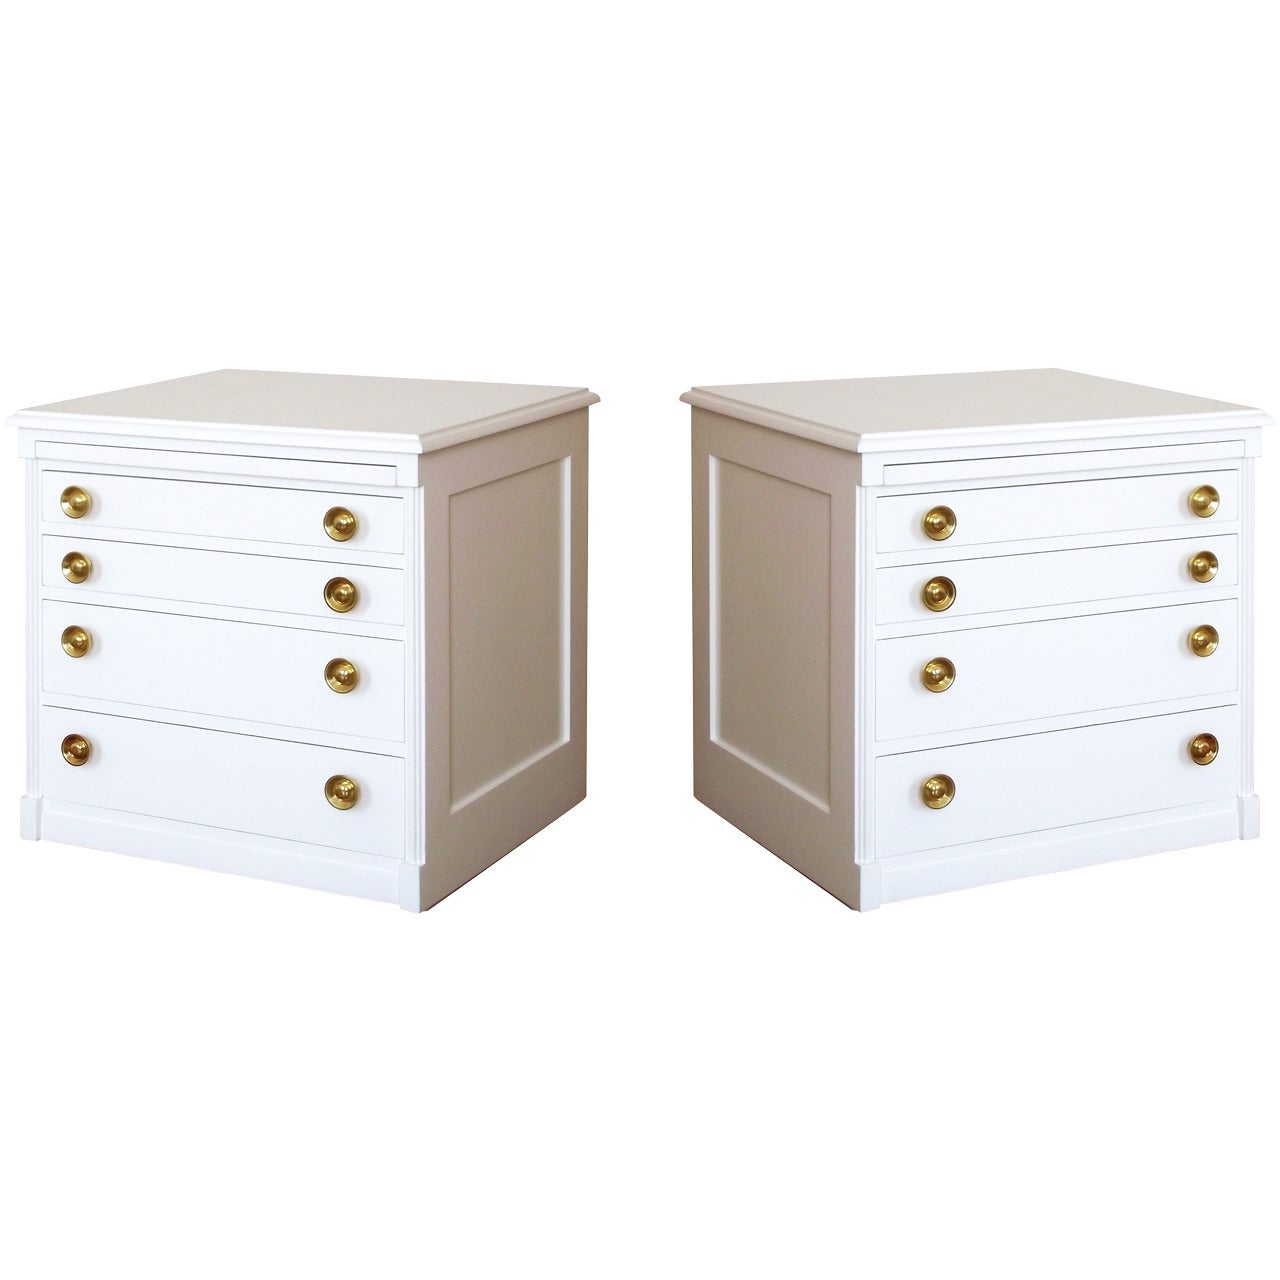 Pair of 1950s Modern White Lacquered End Tables or Nightstands